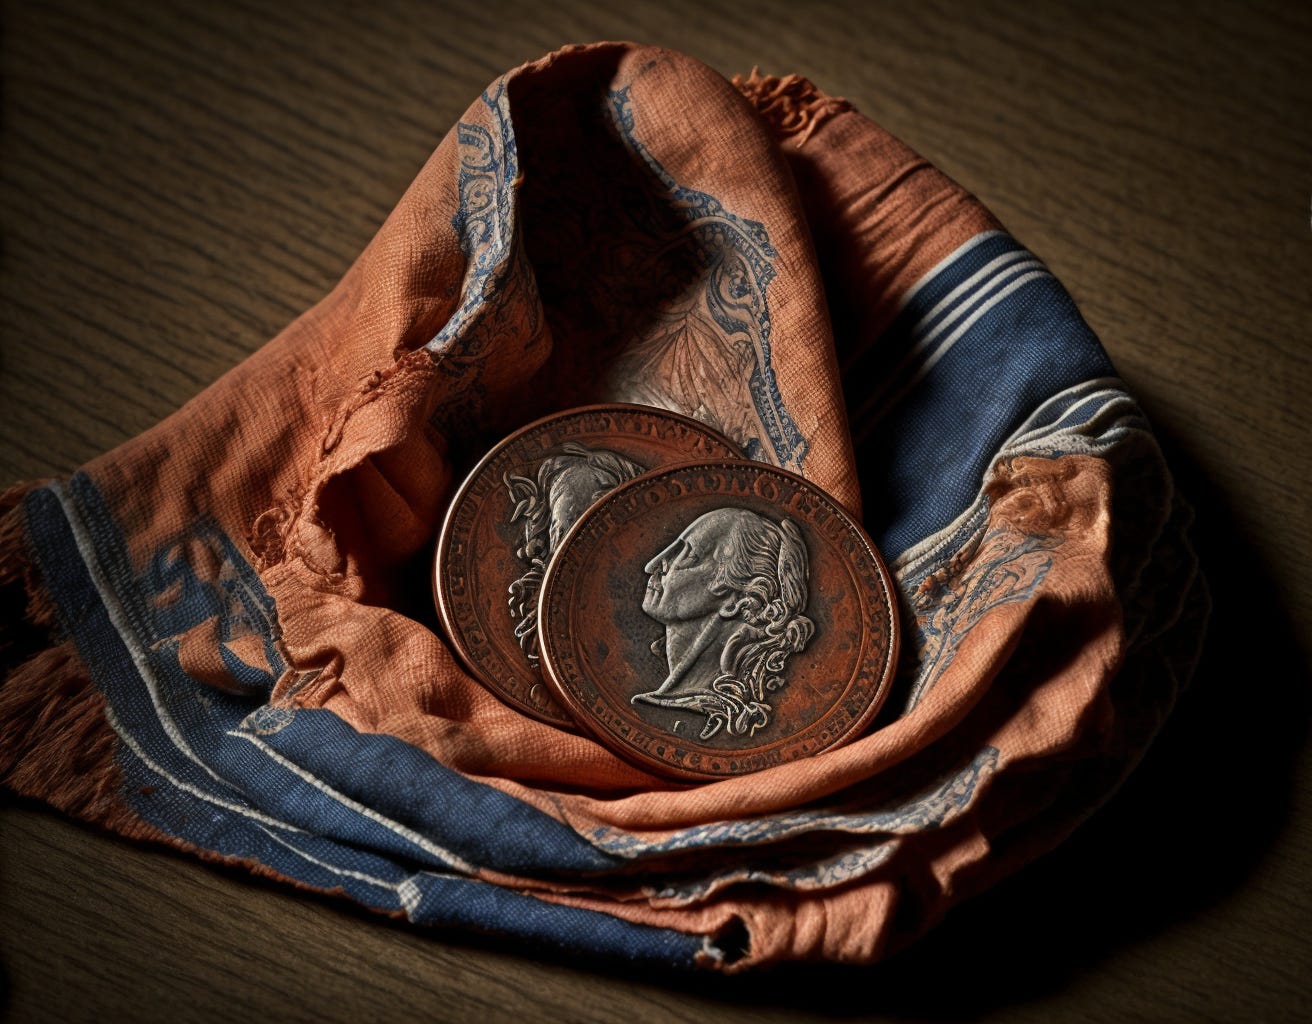 two copper coins rest upon an old orange and blue handkerchief